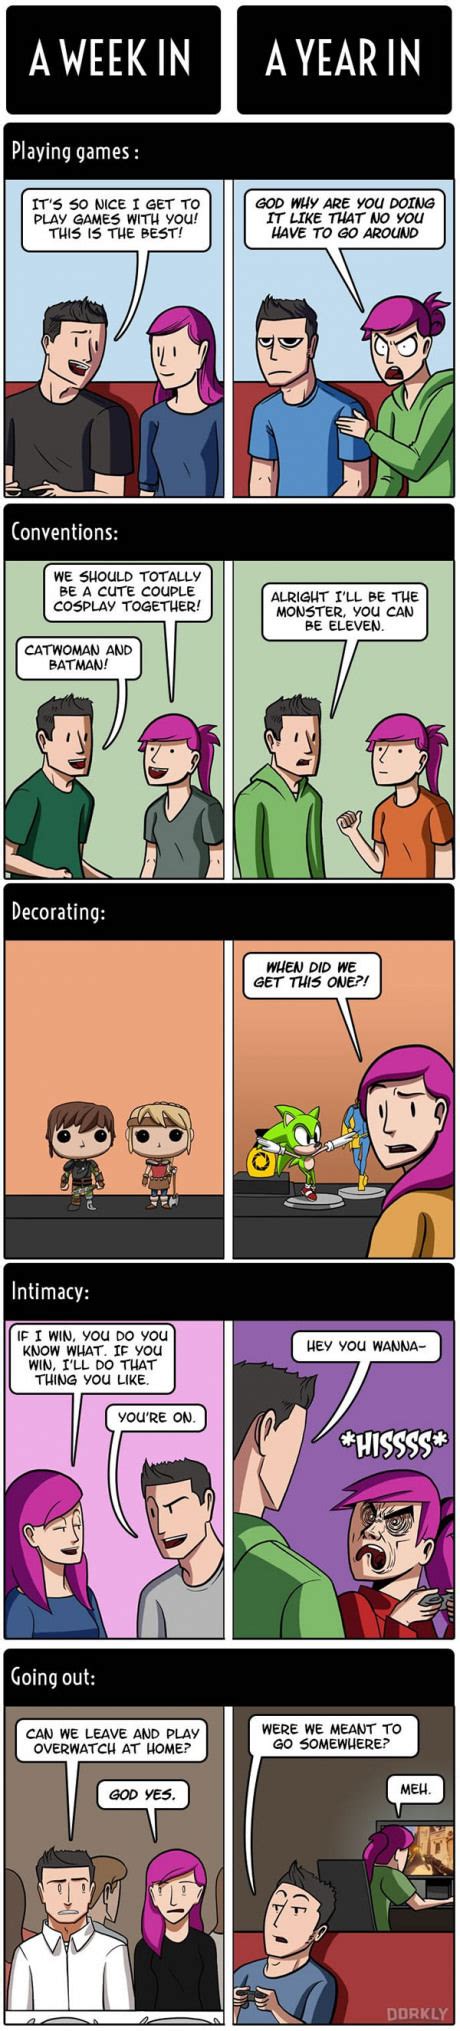 nerdy relationships a week in vs a year in funny couples memes funny memes funny christmas